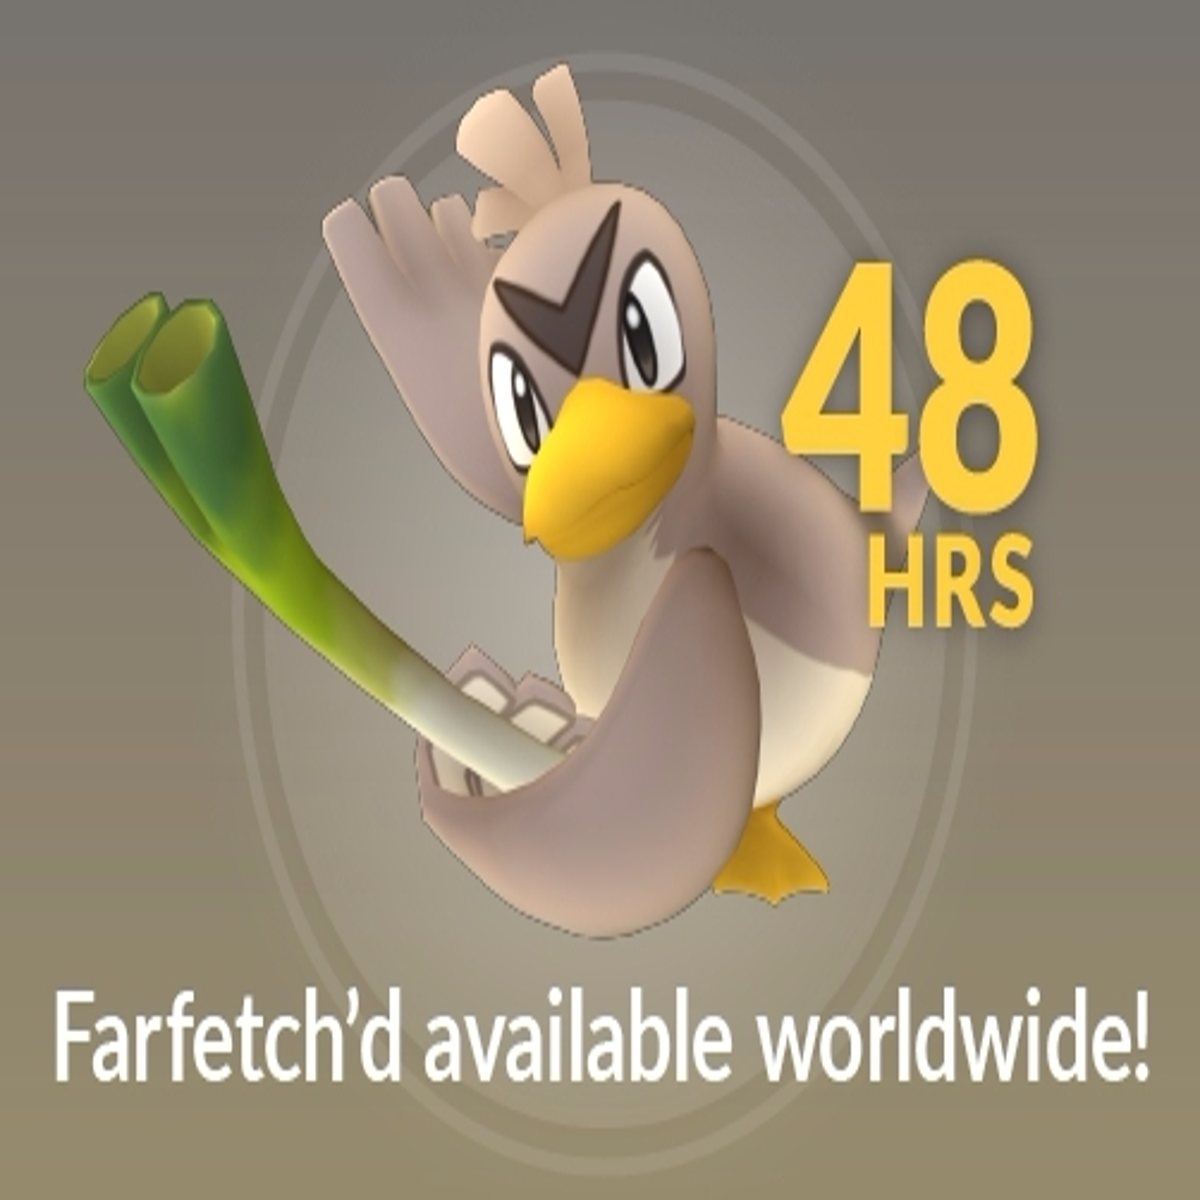 Here's a quick look at the Farfetch'd - Pokémon Singapore